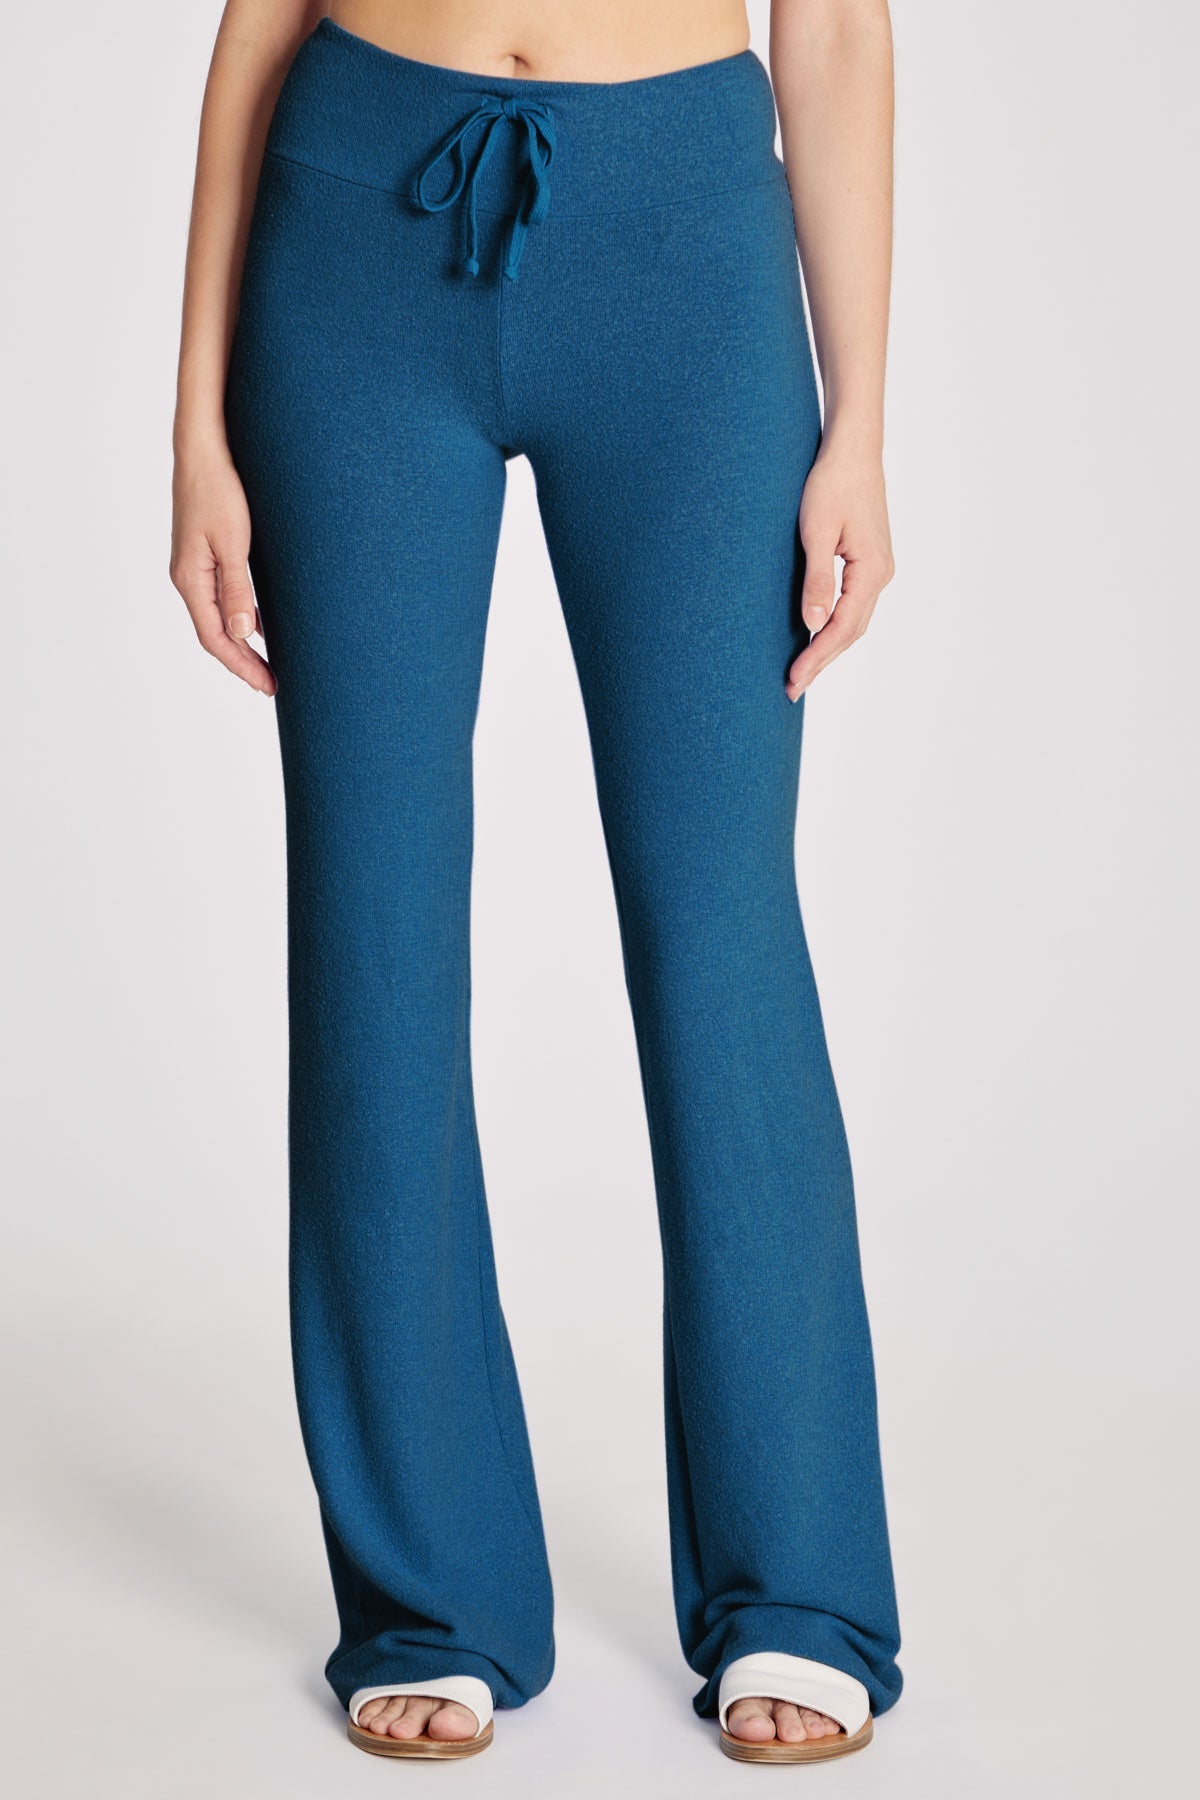 Tennis Club Pants – Wildfox Couture